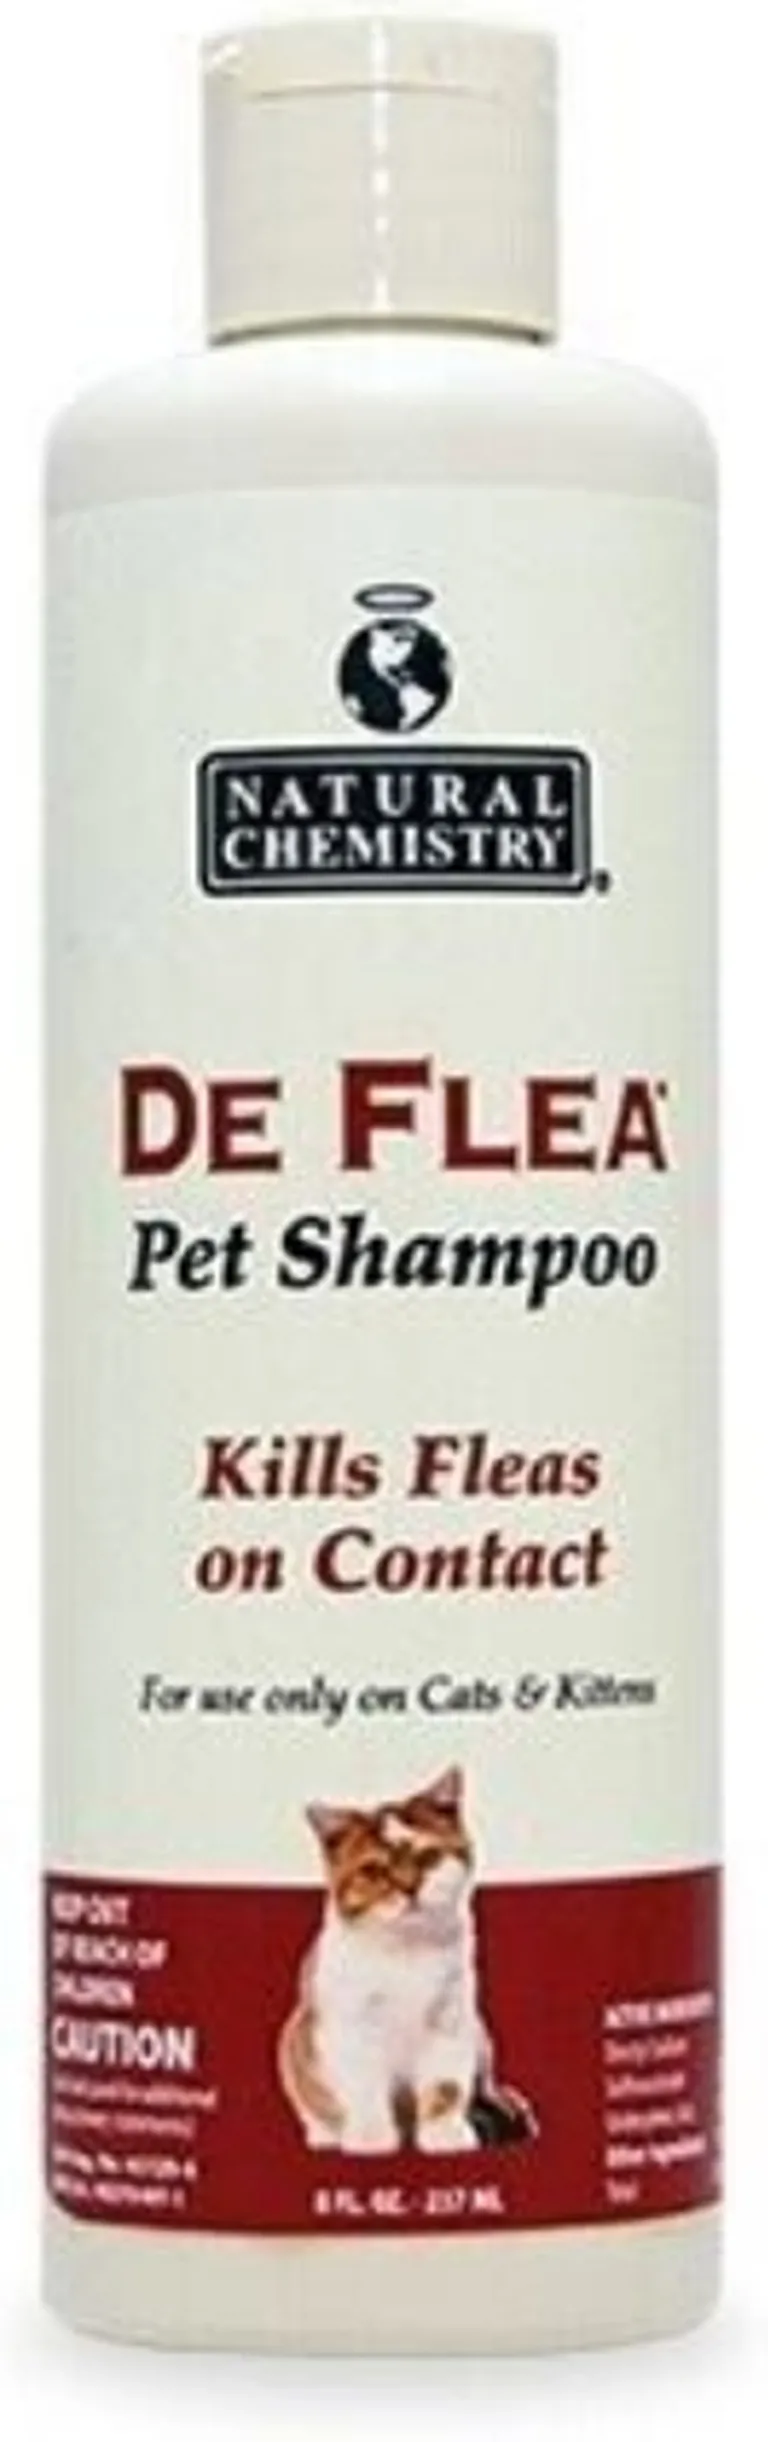 Miracle Care Natural Chemistry DeFlea Pet Shampoo for Cats Photo 1